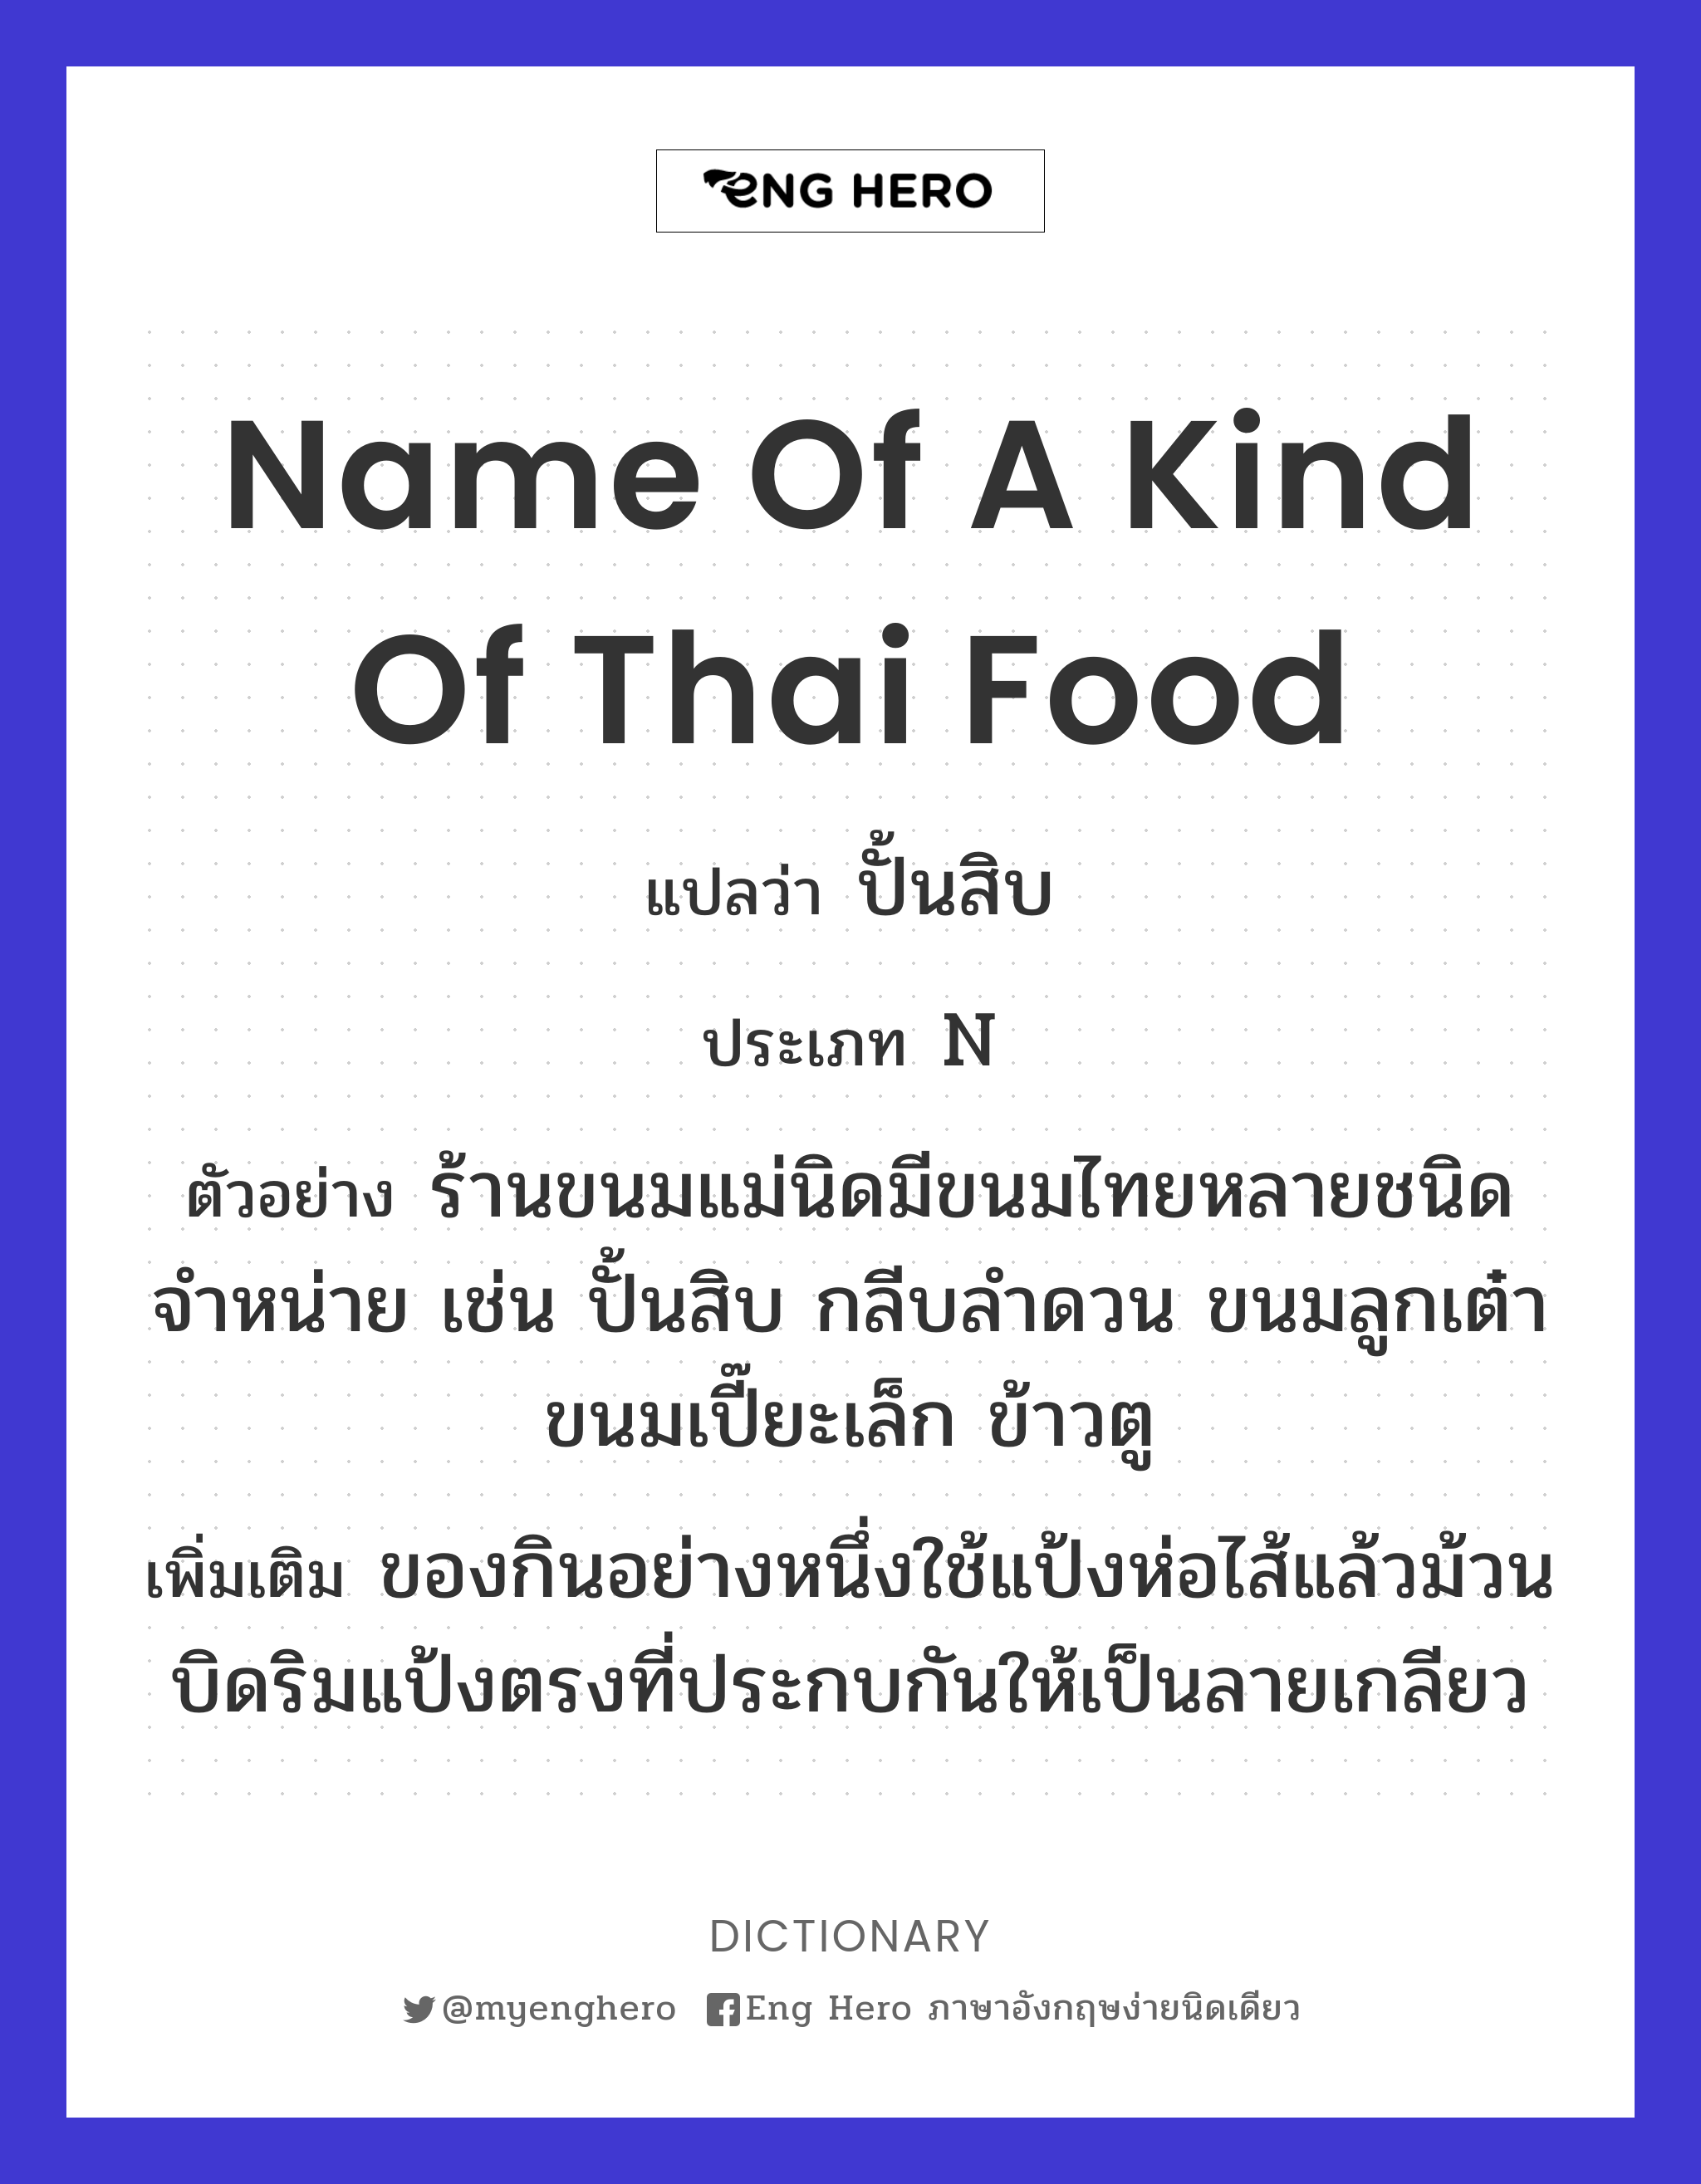 name of a kind of Thai food